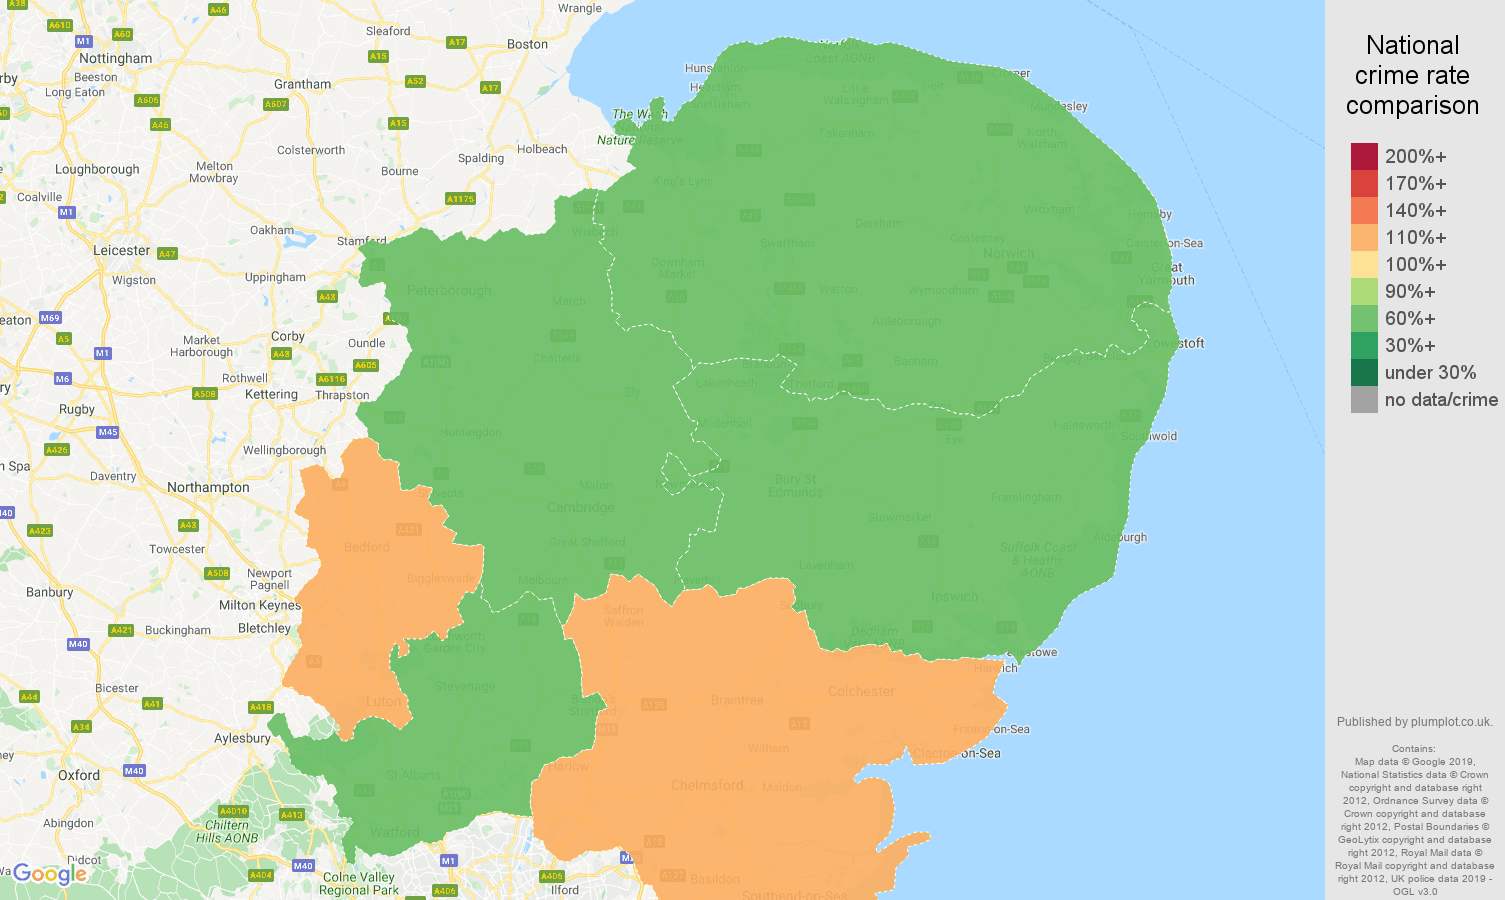 East of England public order crime rate comparison map